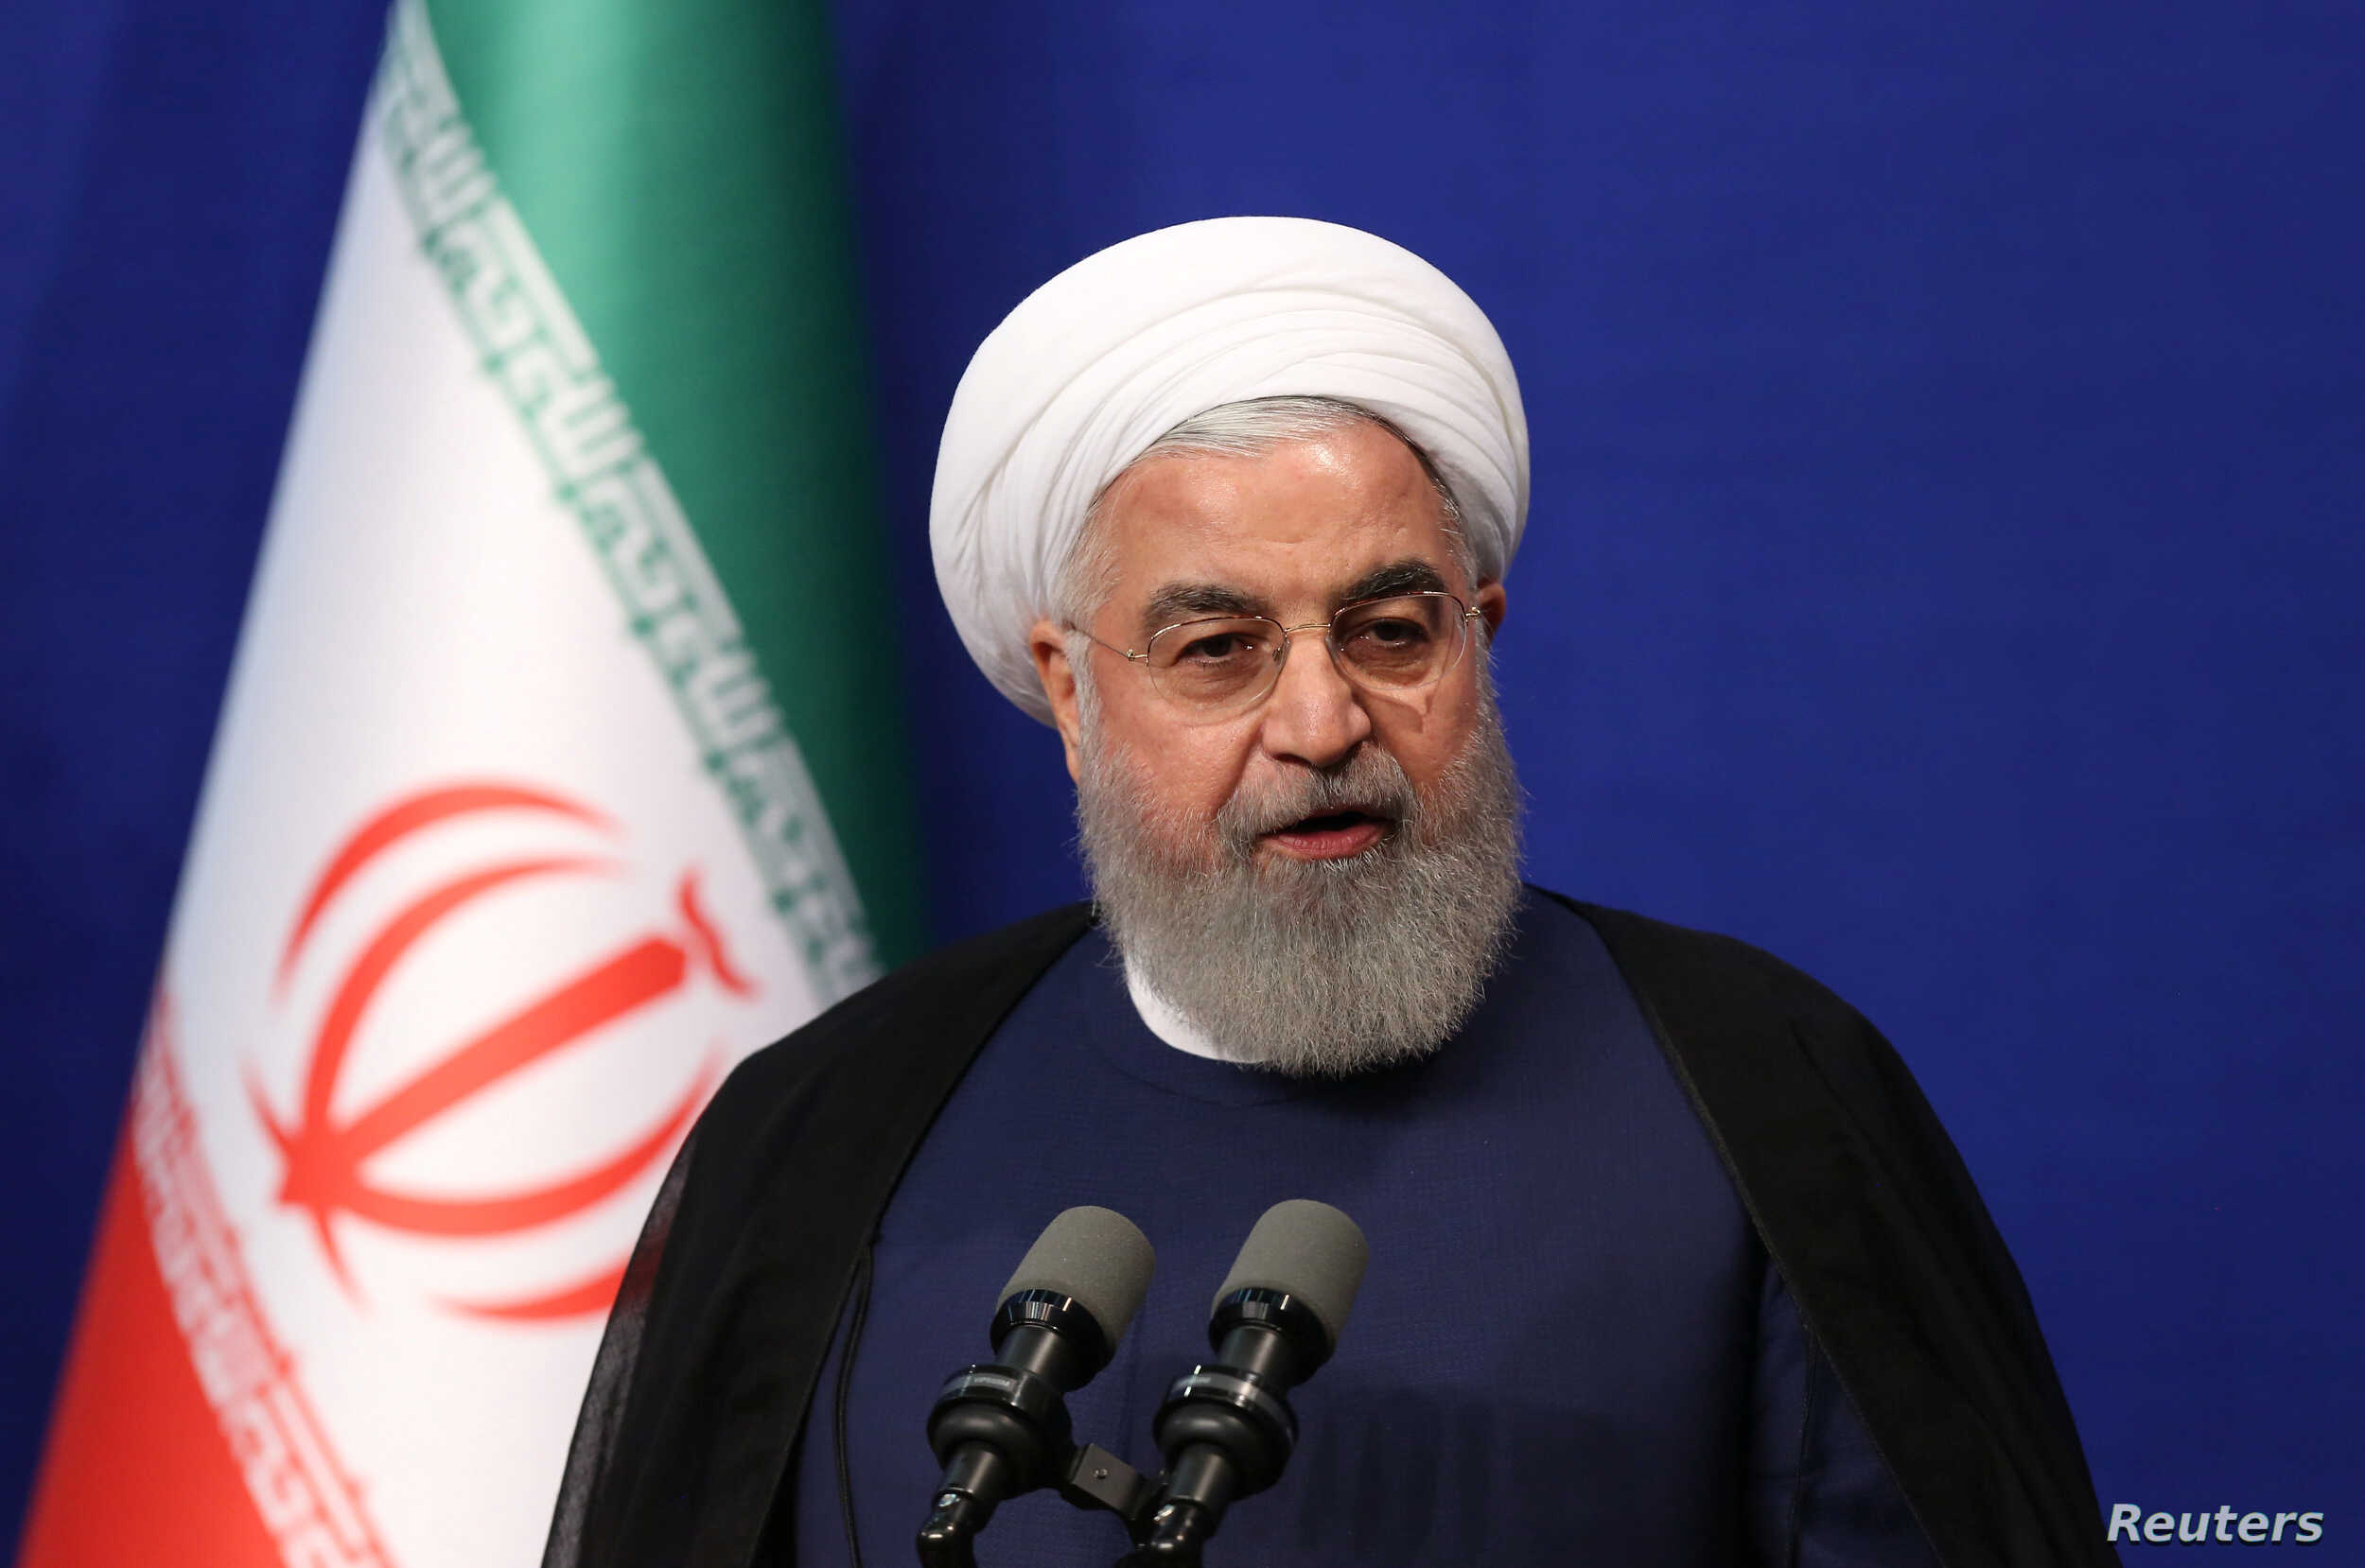 Leaked audio: Rouhani warns on division sown by ‘enemy’